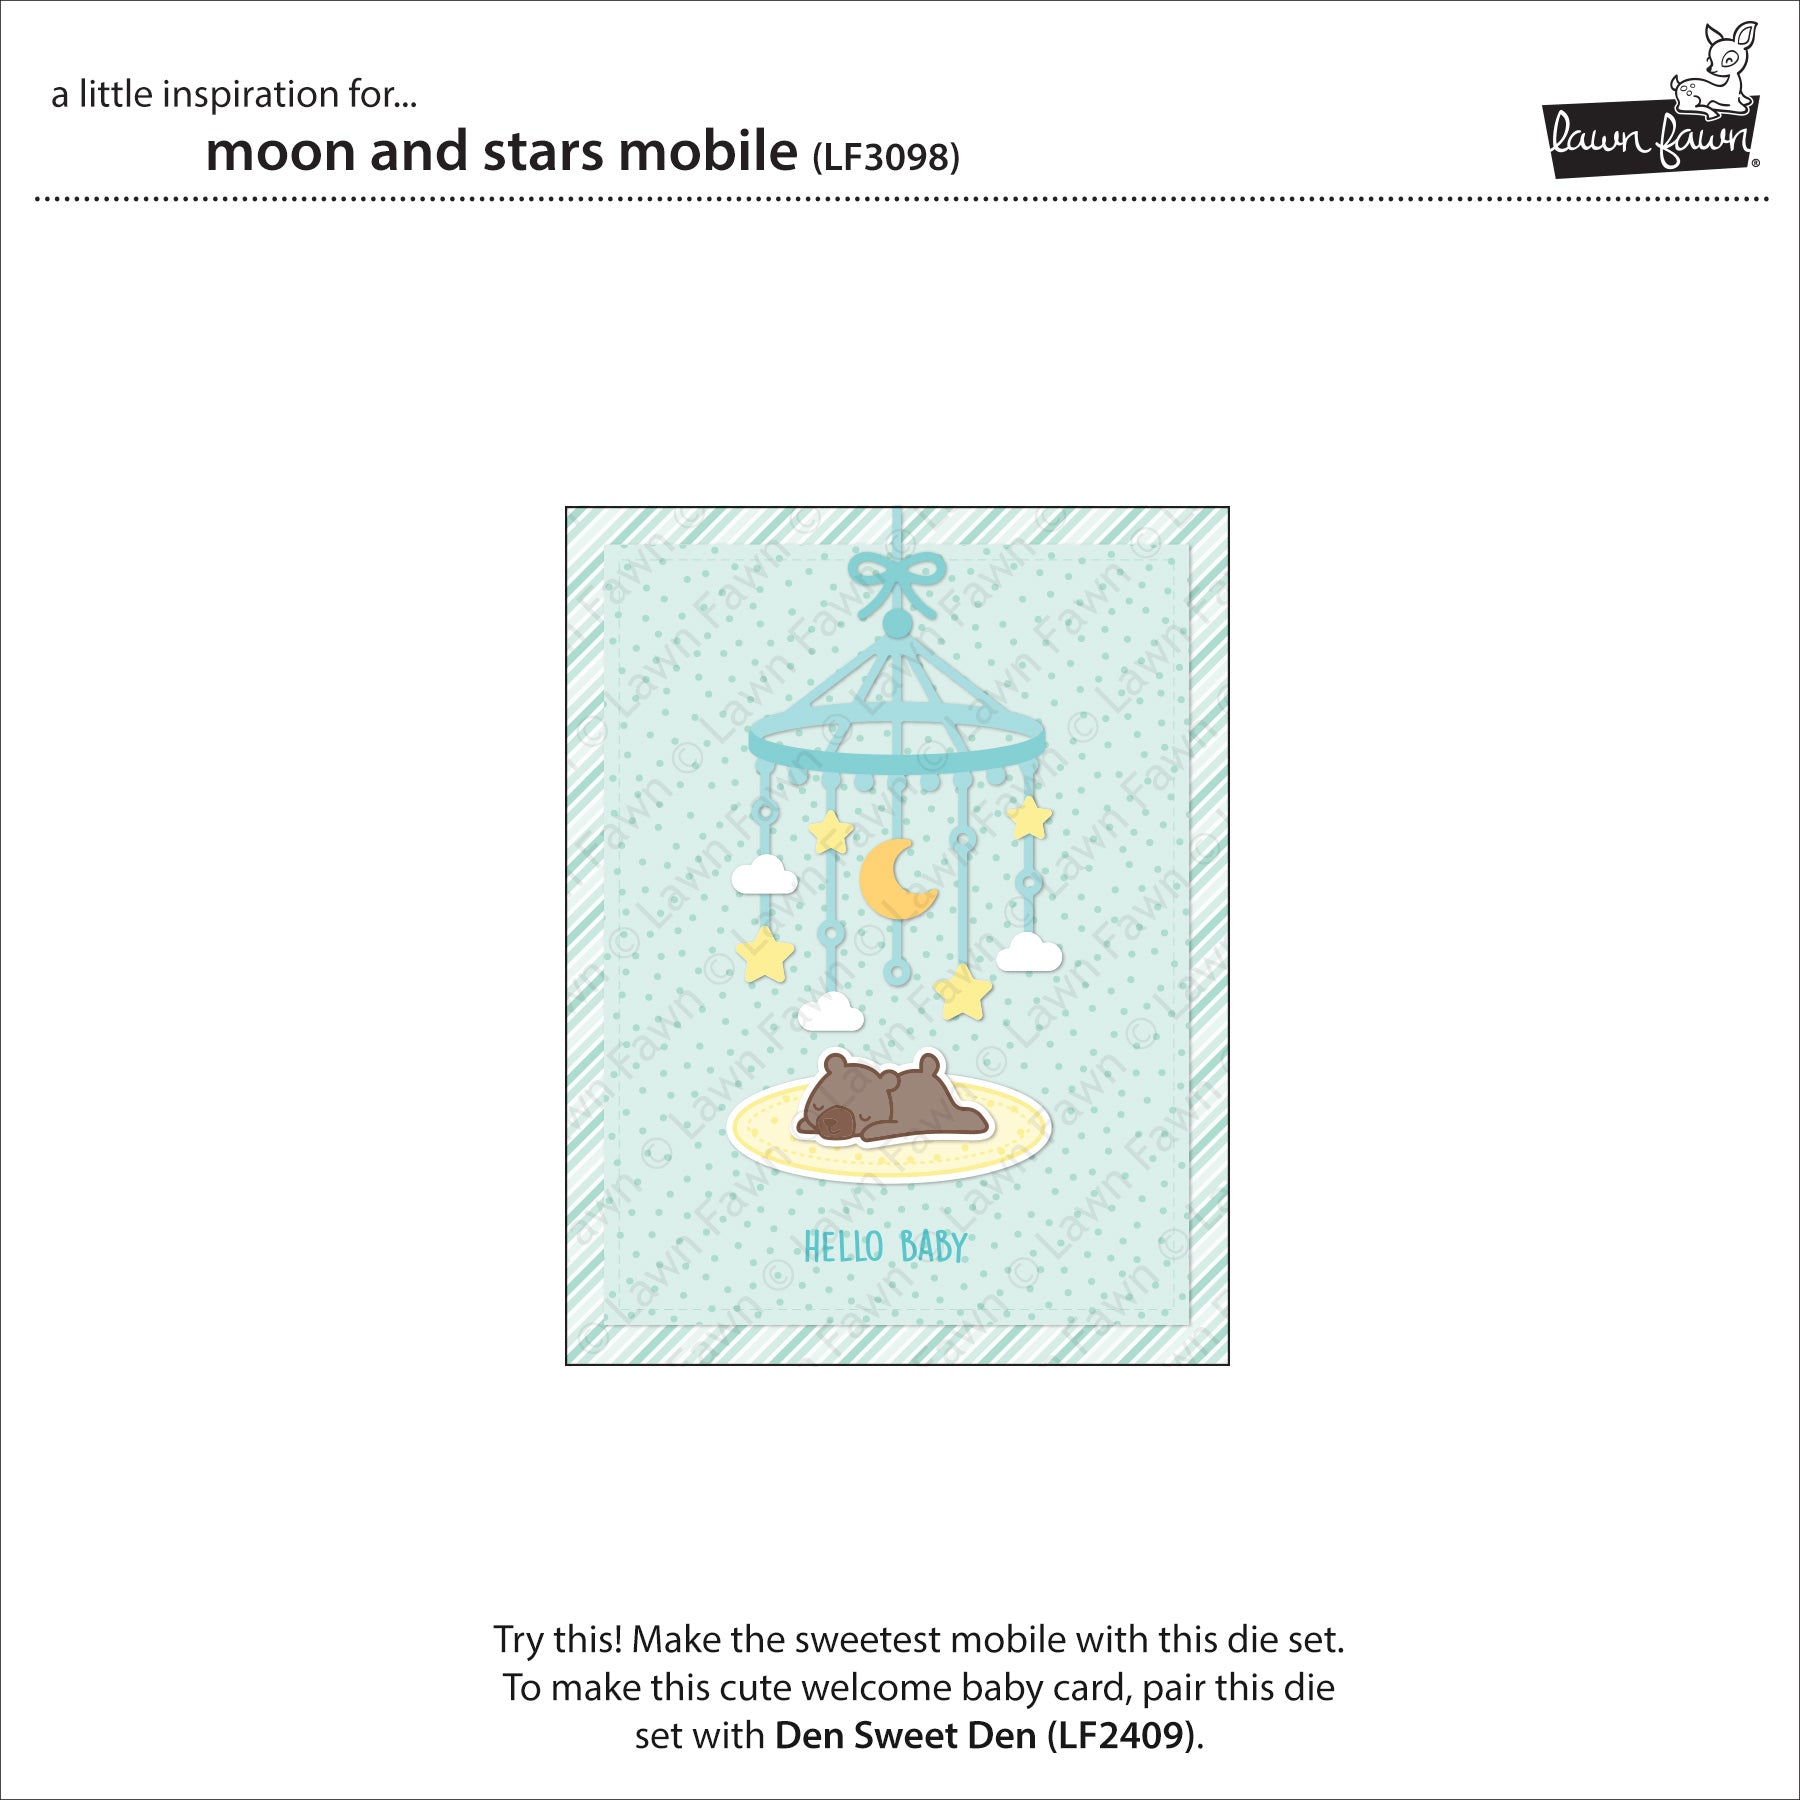 moon and stars mobile